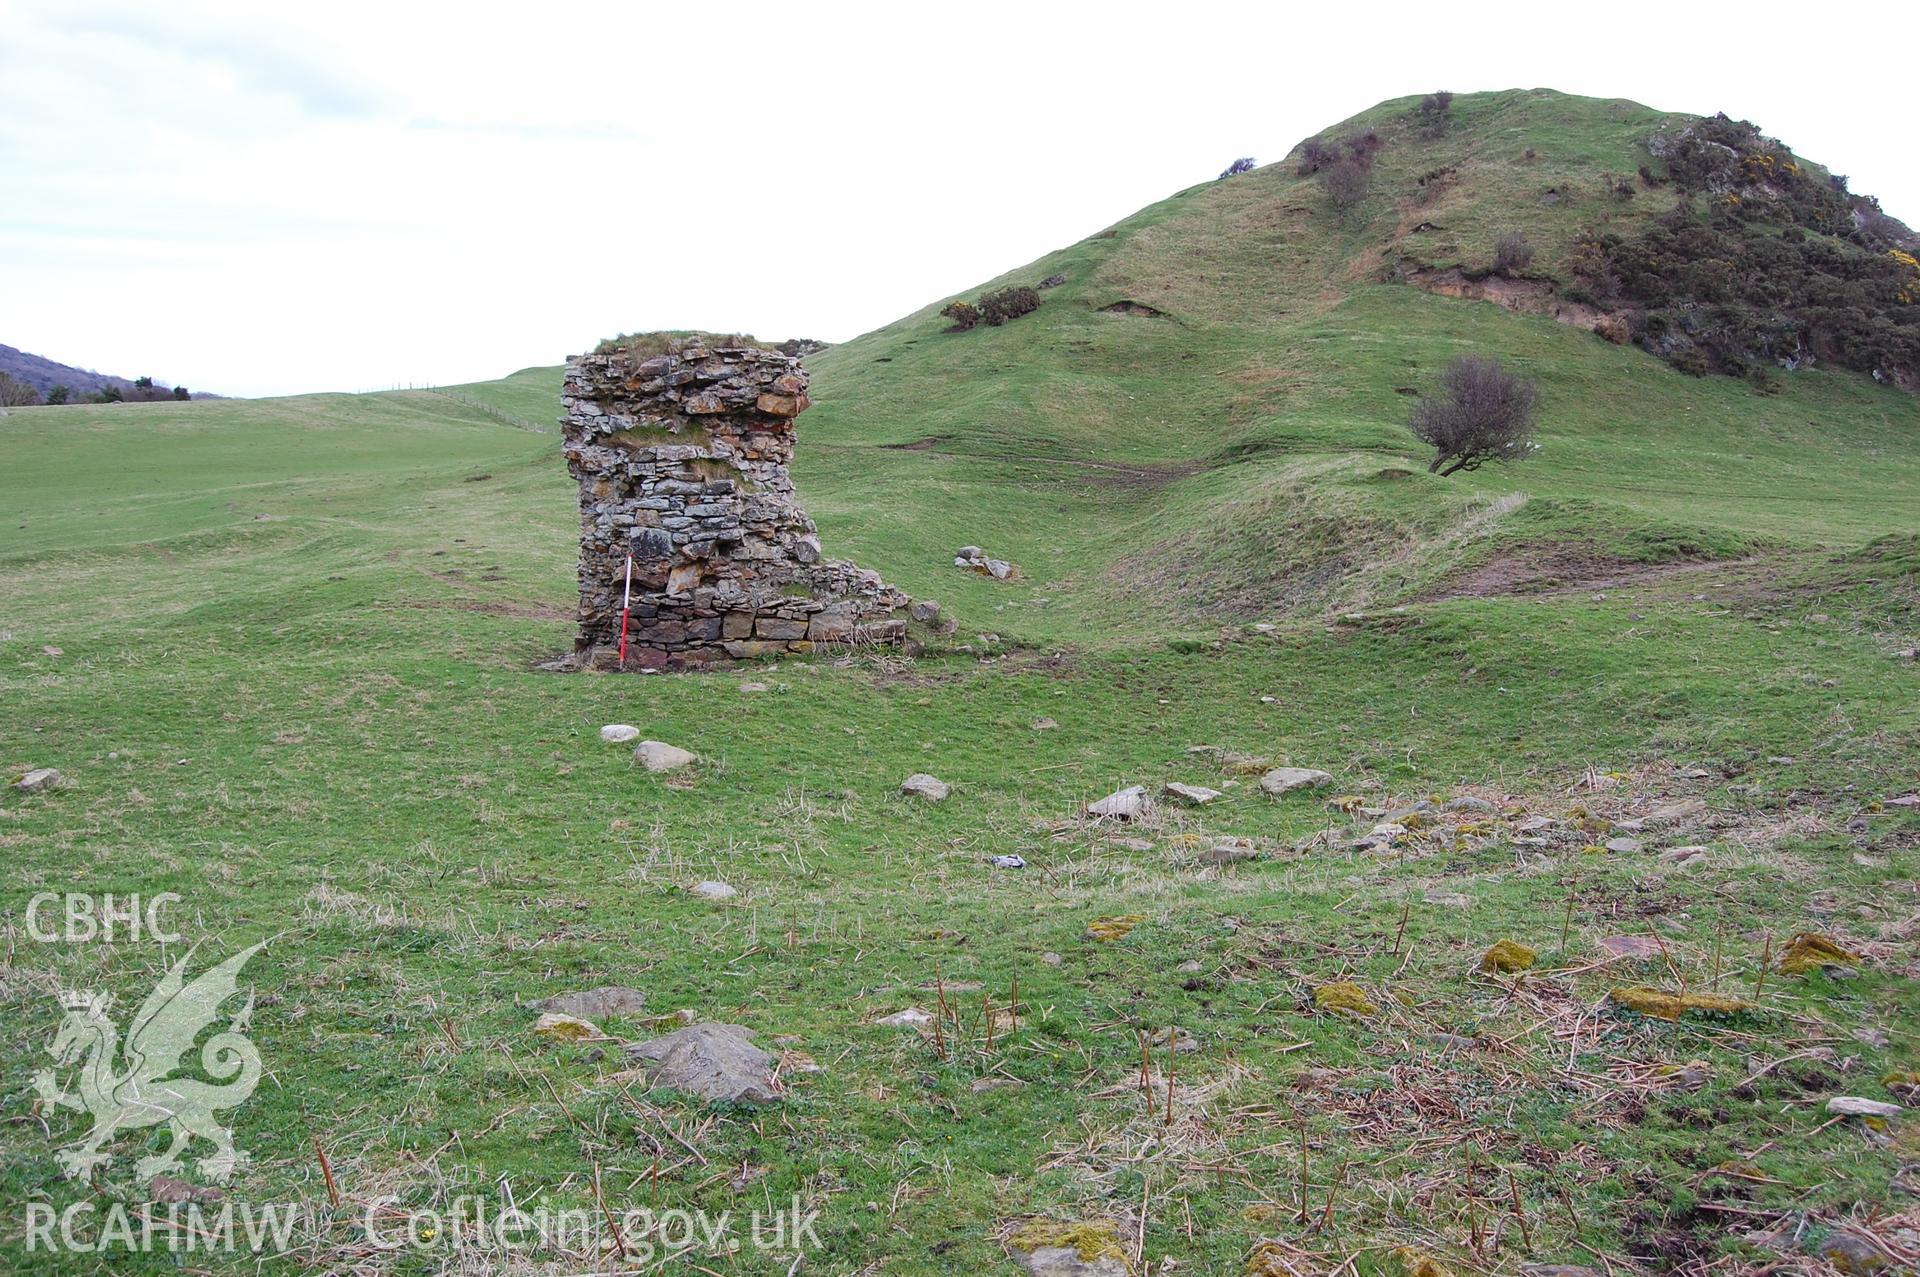 Digital photograph from an archaeological assessment of Deganwy Castle, carried out by Gwynedd Archaeological Trust, 2009. North gate.